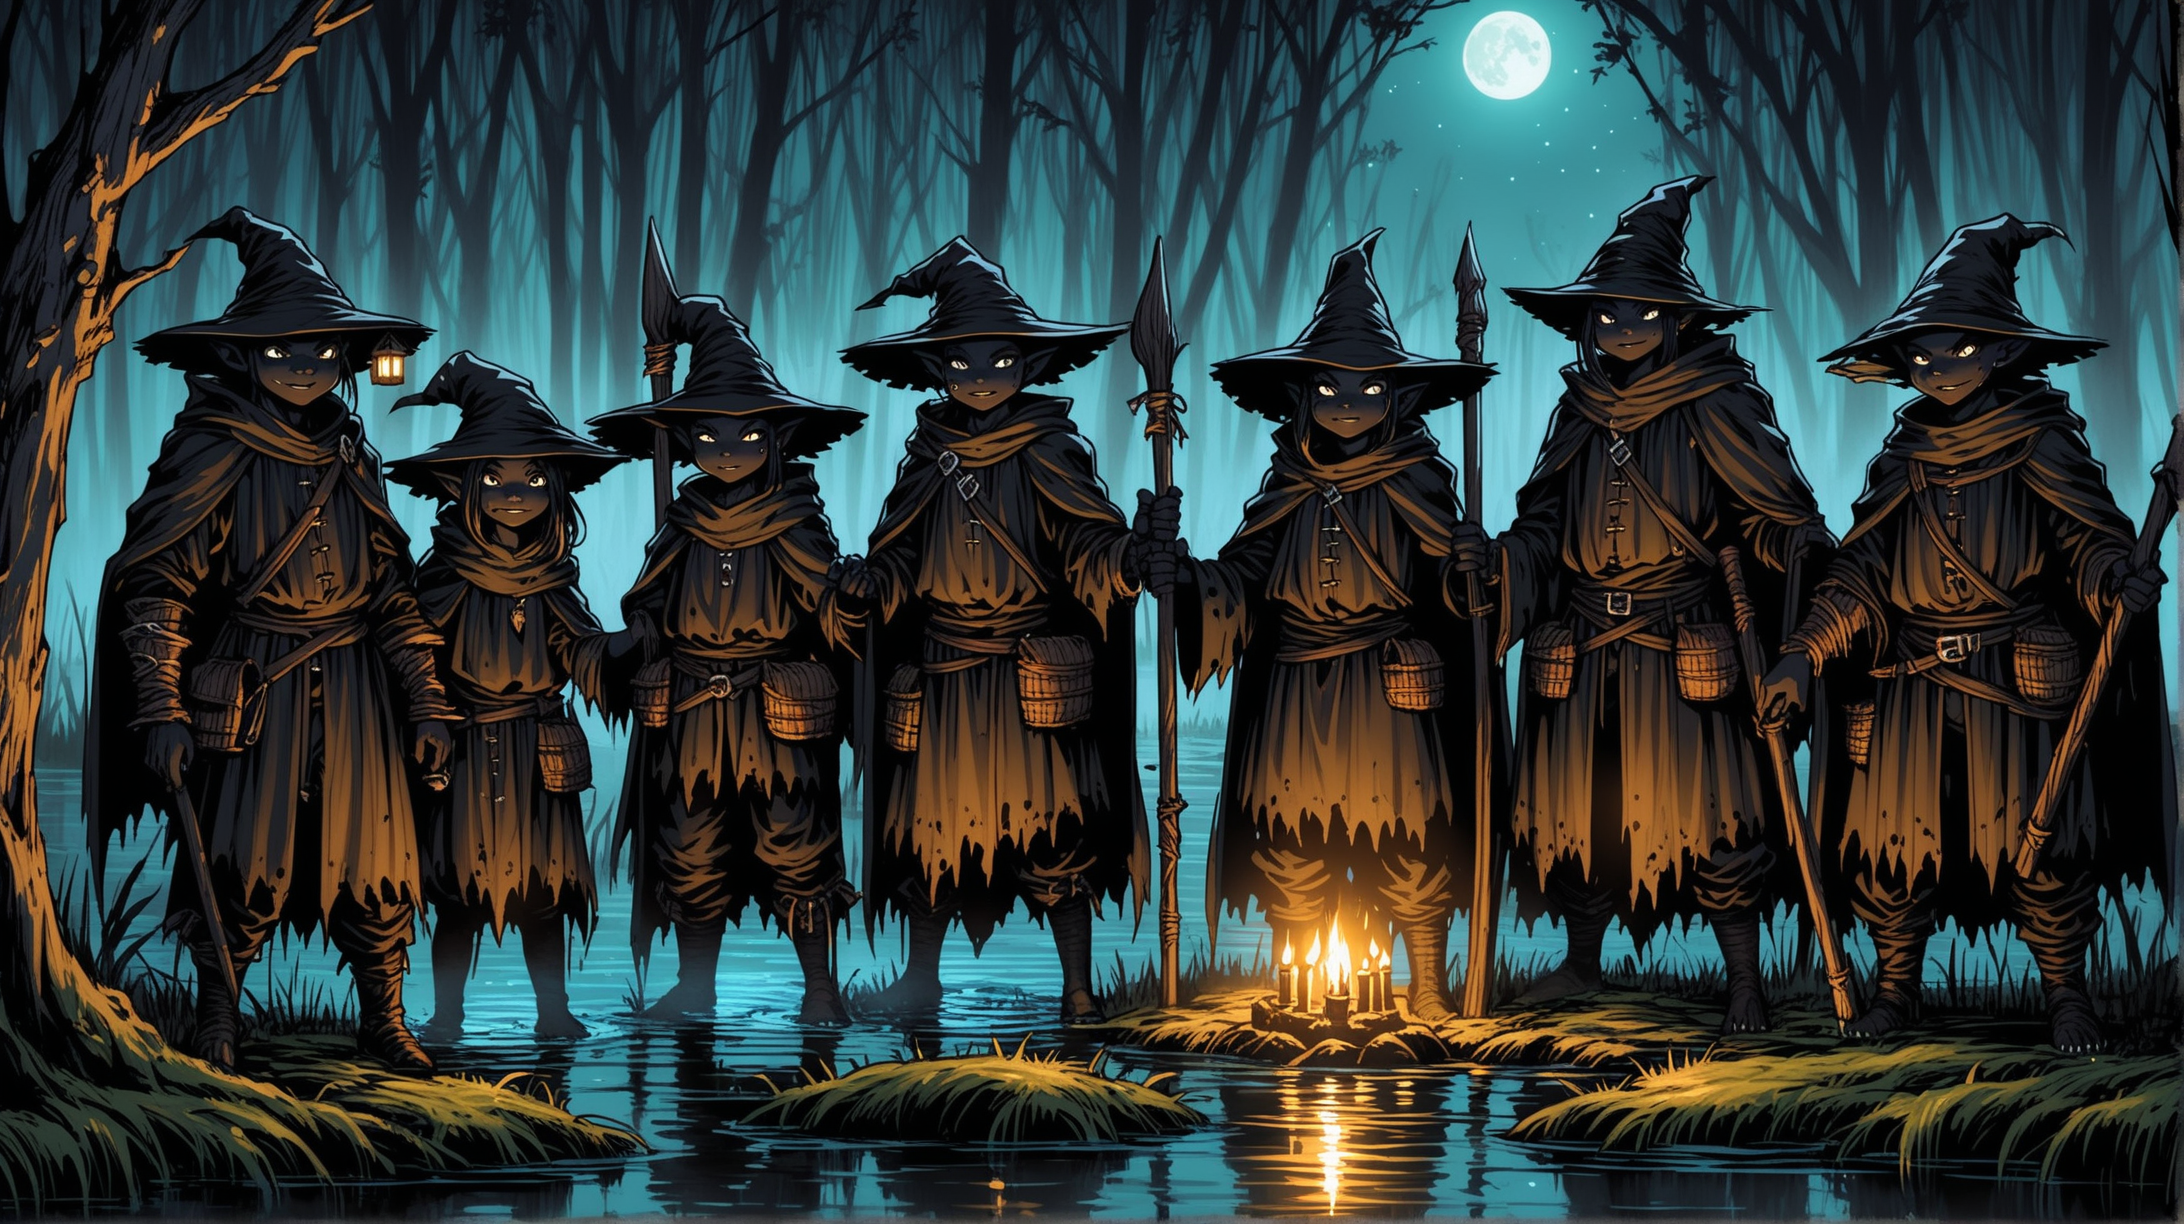 Medieval Fantasy Swamp Night Gathering of Black Goblin Rogues and Mages